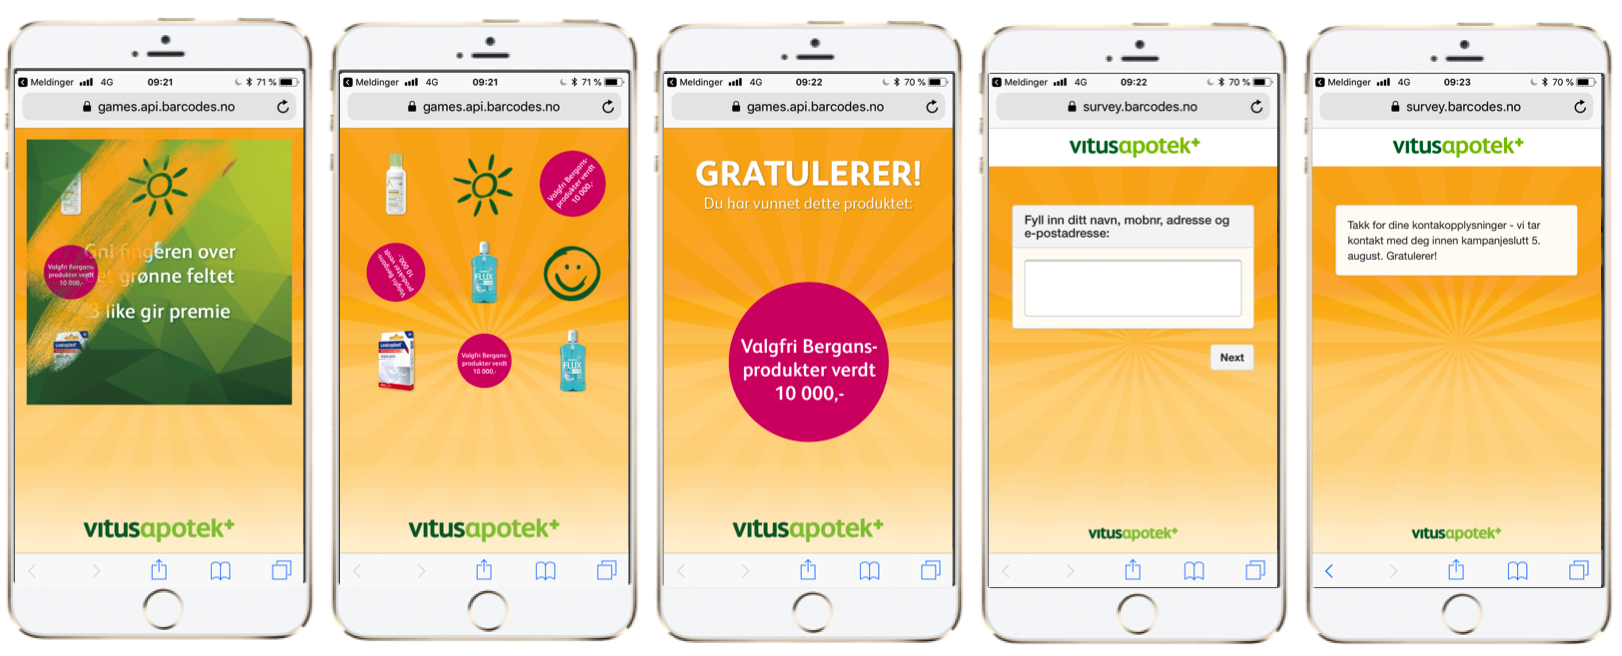 VITUSAPOTEK FAST TRACK CAMPAIGN: gift card cont.